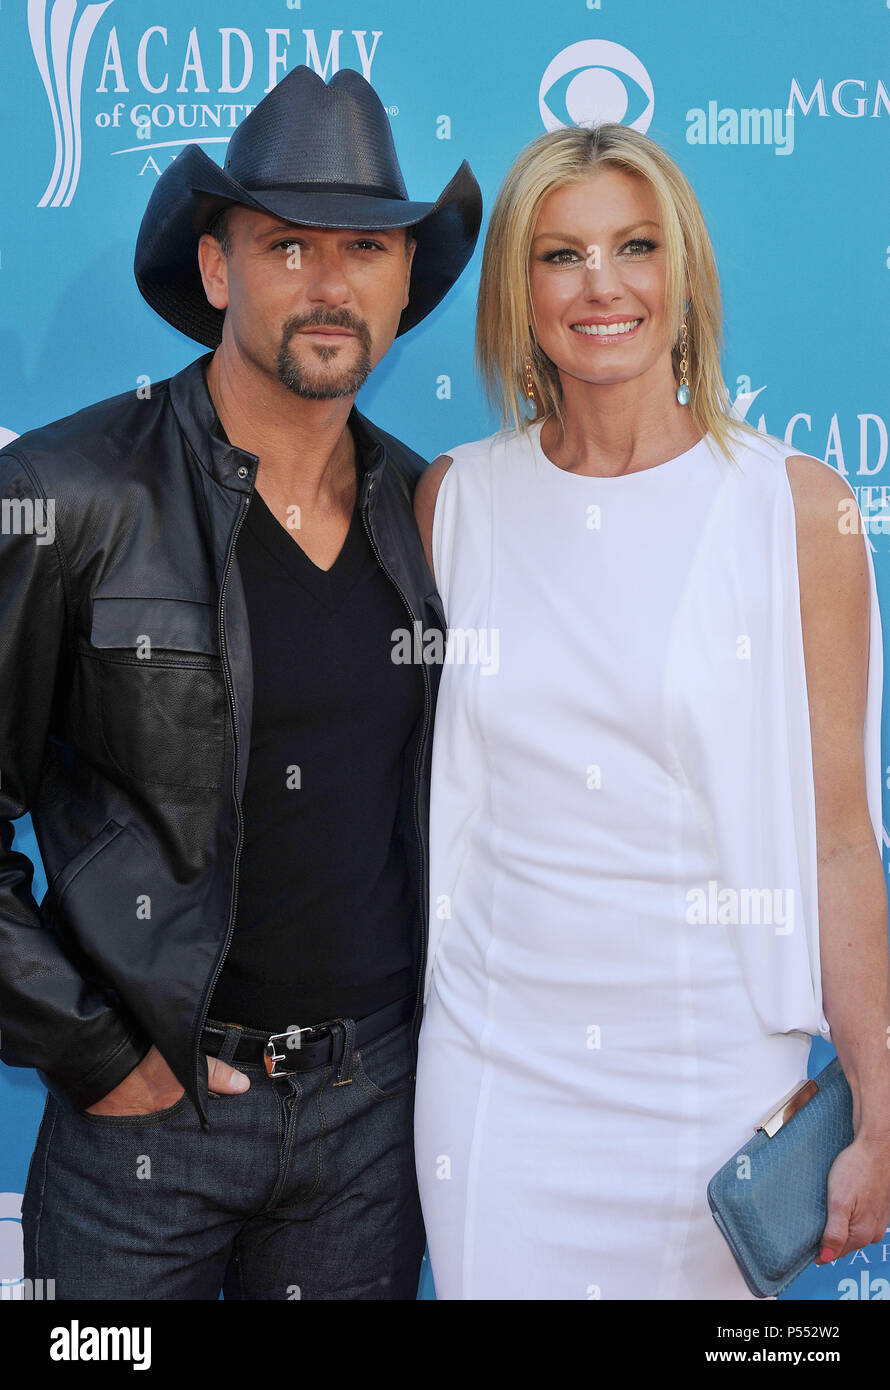 Tim McGraw   Faith Hill  38   - ACM - 45th American Country Music Awards - 2010 at the MGM Hotel In Las Vegas.Tim McGraw   Faith Hill  38  Event in Hollywood Life - California, Red Carpet Event, USA, Film Industry, Celebrities, Photography, Bestof, Arts Culture and Entertainment, Celebrities fashion, Best of, Hollywood Life, Event in Hollywood Life - California, Red Carpet and backstage, Music celebrities, Topix, Couple, family ( husband and wife ) and kids- Children, brothers and sisters inquiry tsuni@Gamma-USA.com, Credit Tsuni / USA, 2010 Stock Photo